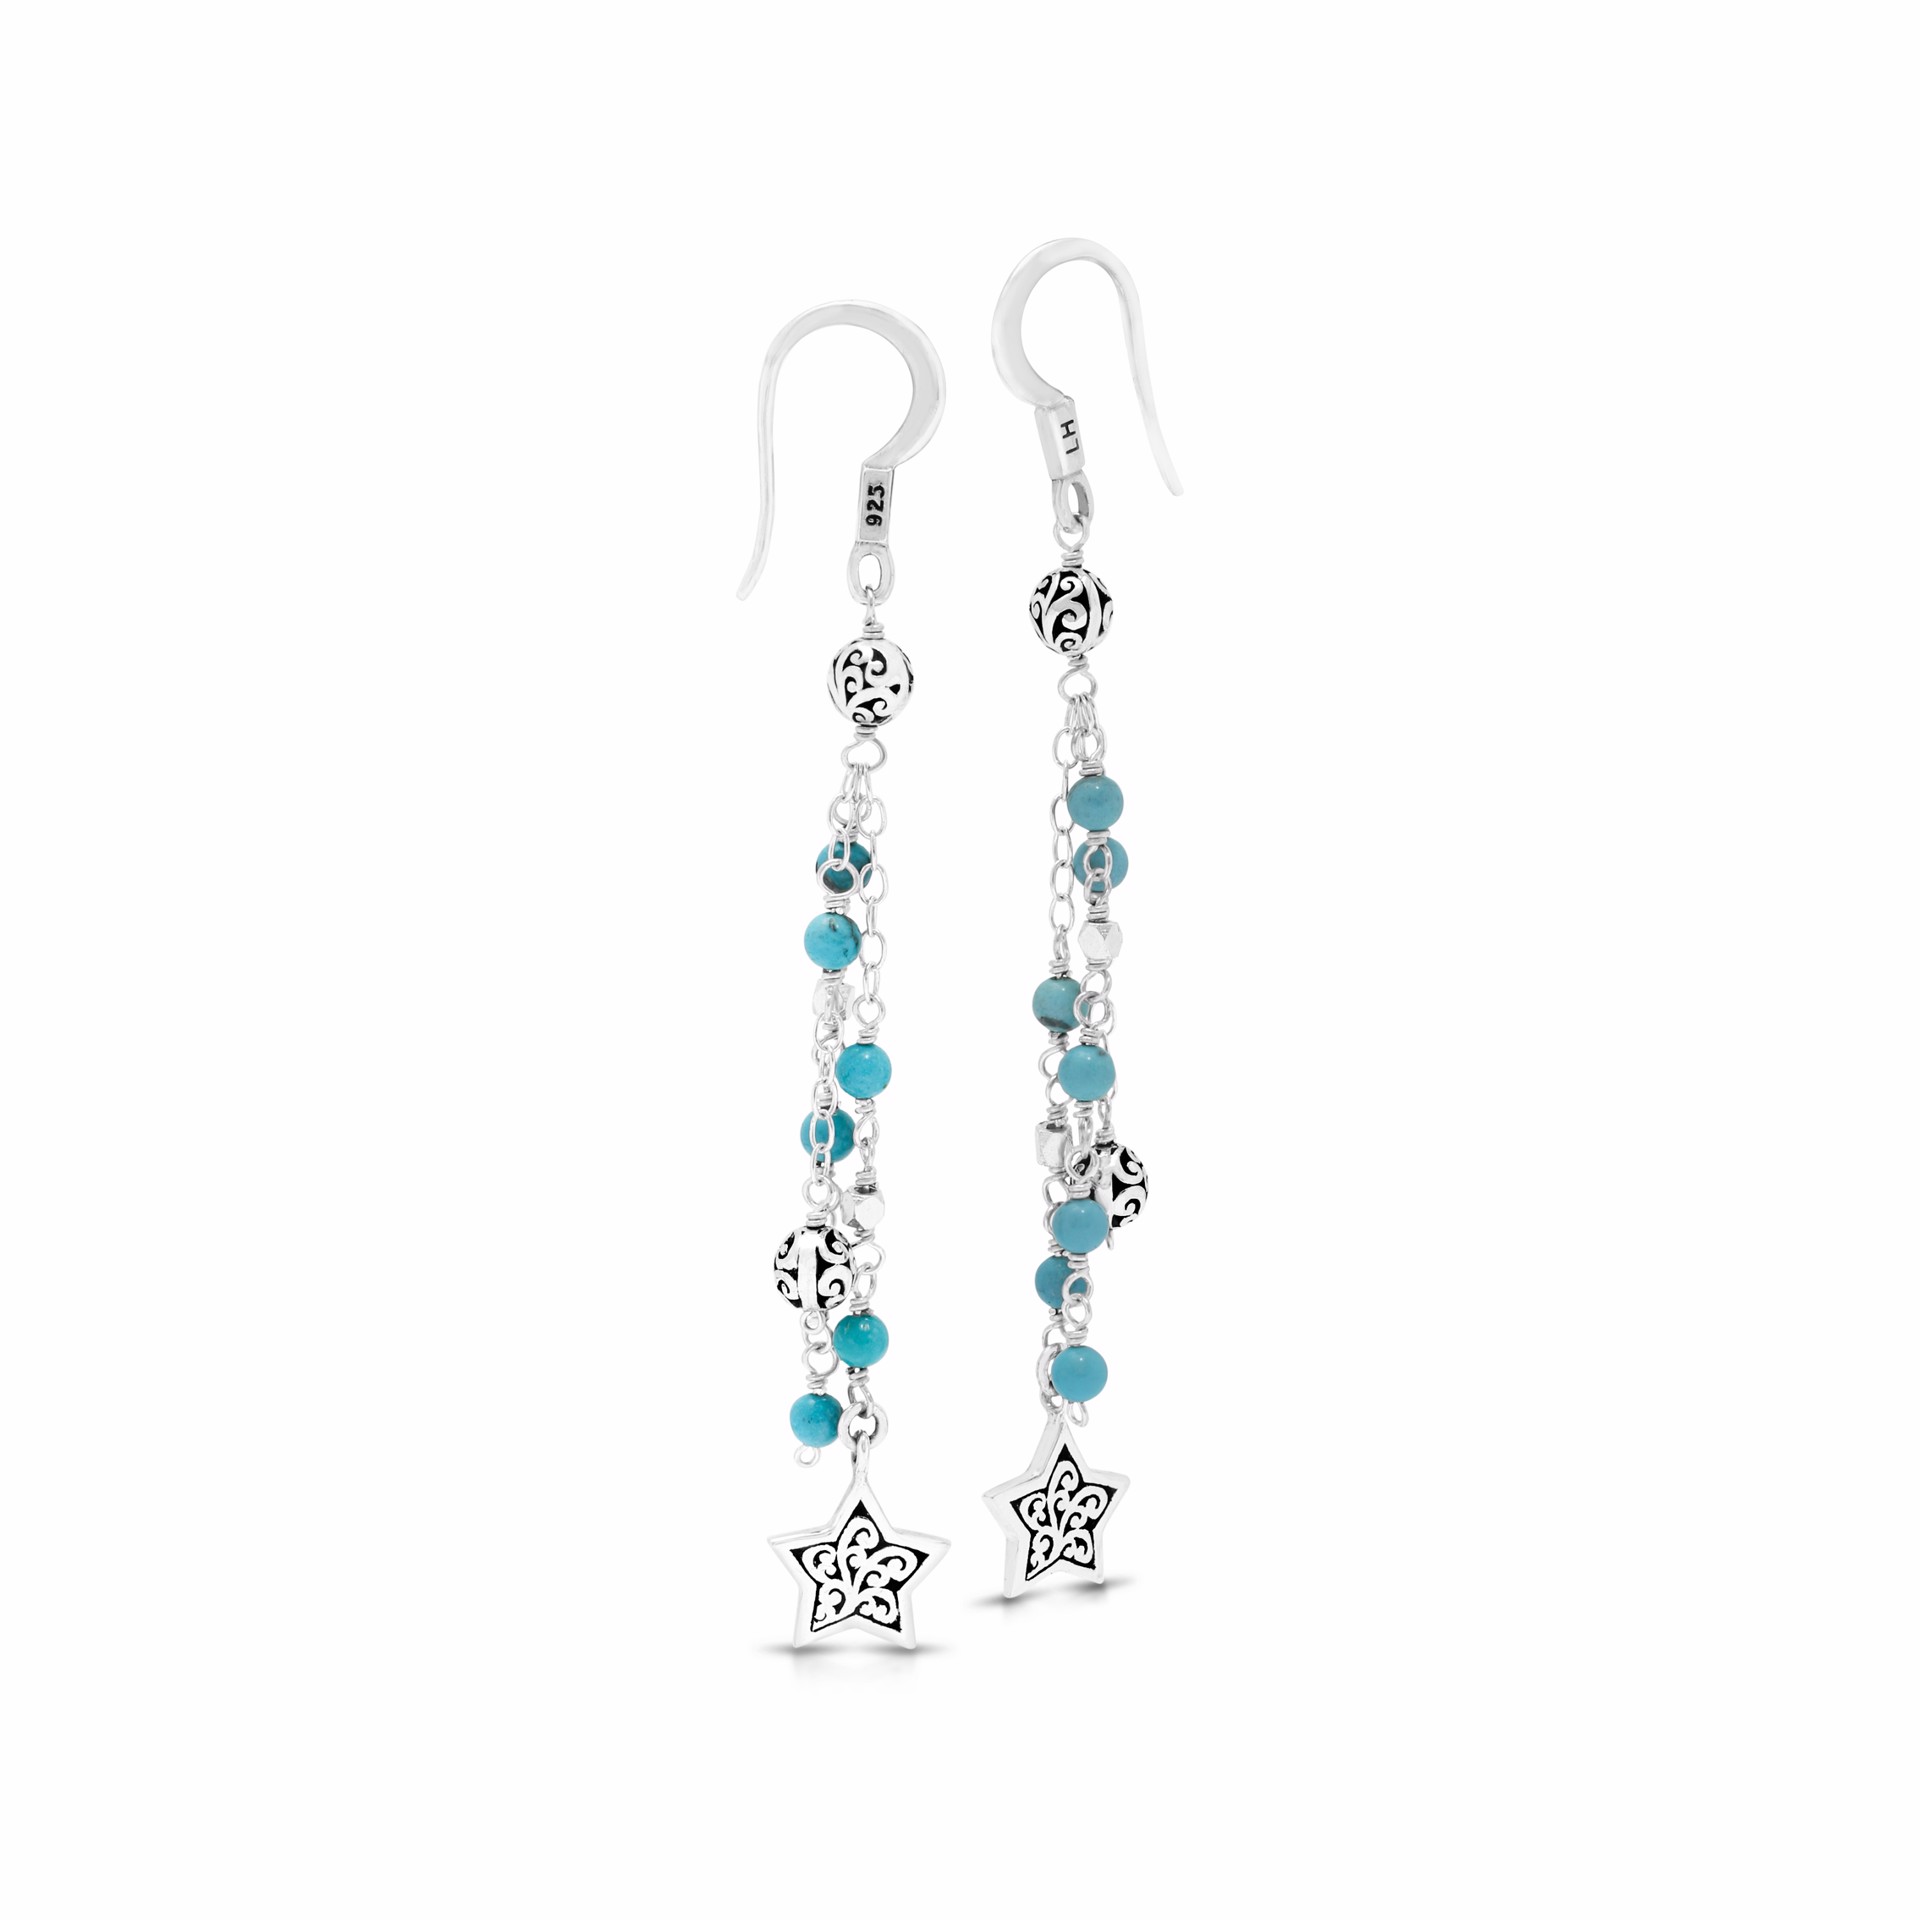 9660 Turquoise Drop Earrings with Signature Scroll Carving in Sterling Silver Beads and Stars by Lois Hill